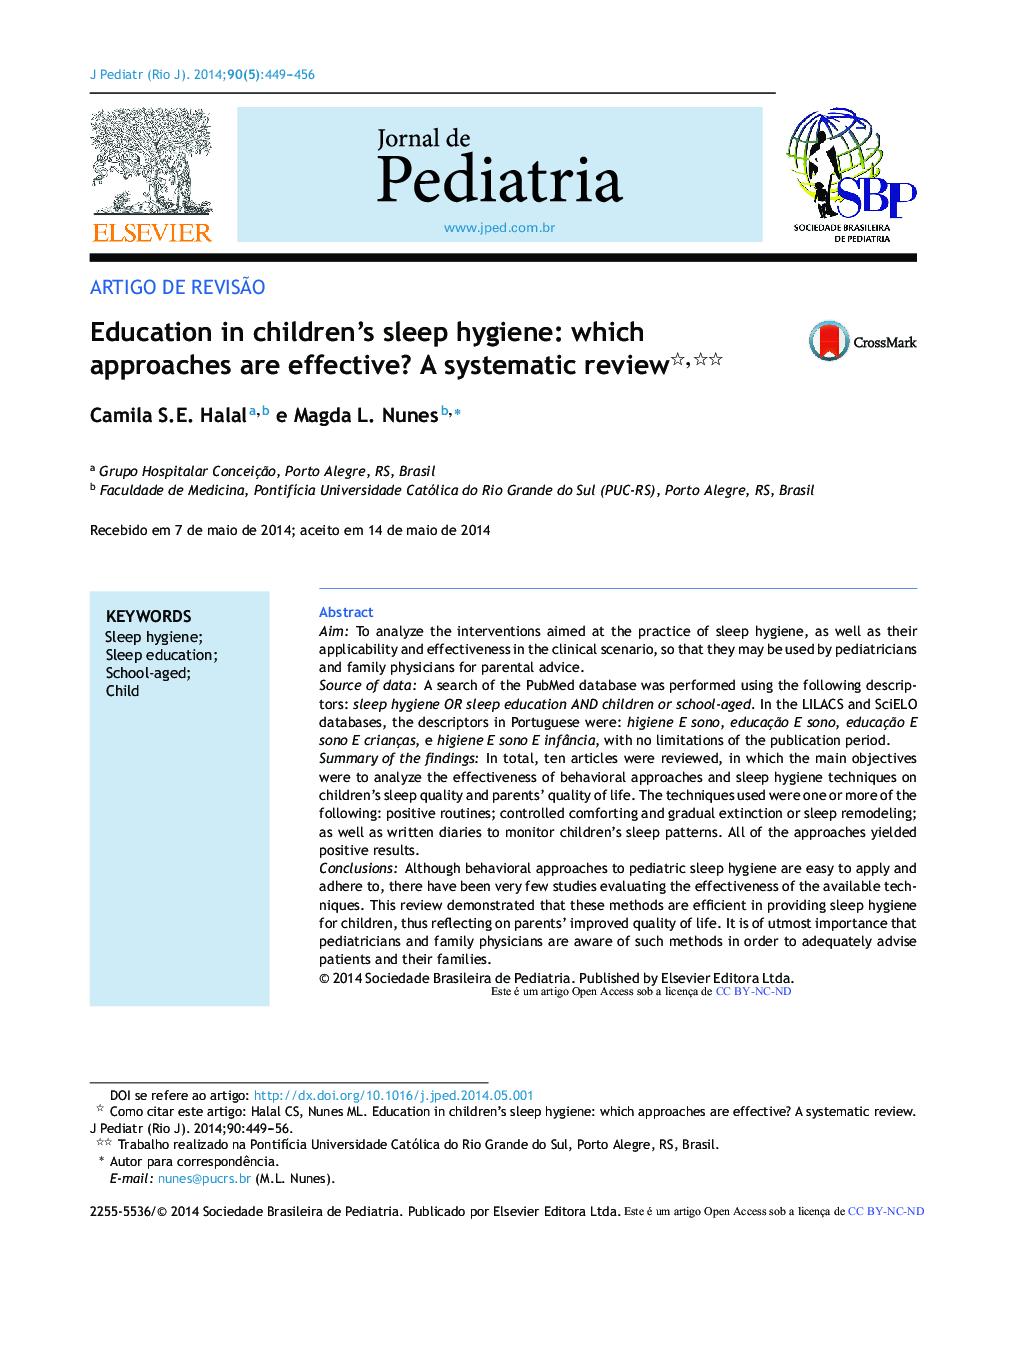 Education in children's sleep hygiene: which approaches are effective? A systematic review 